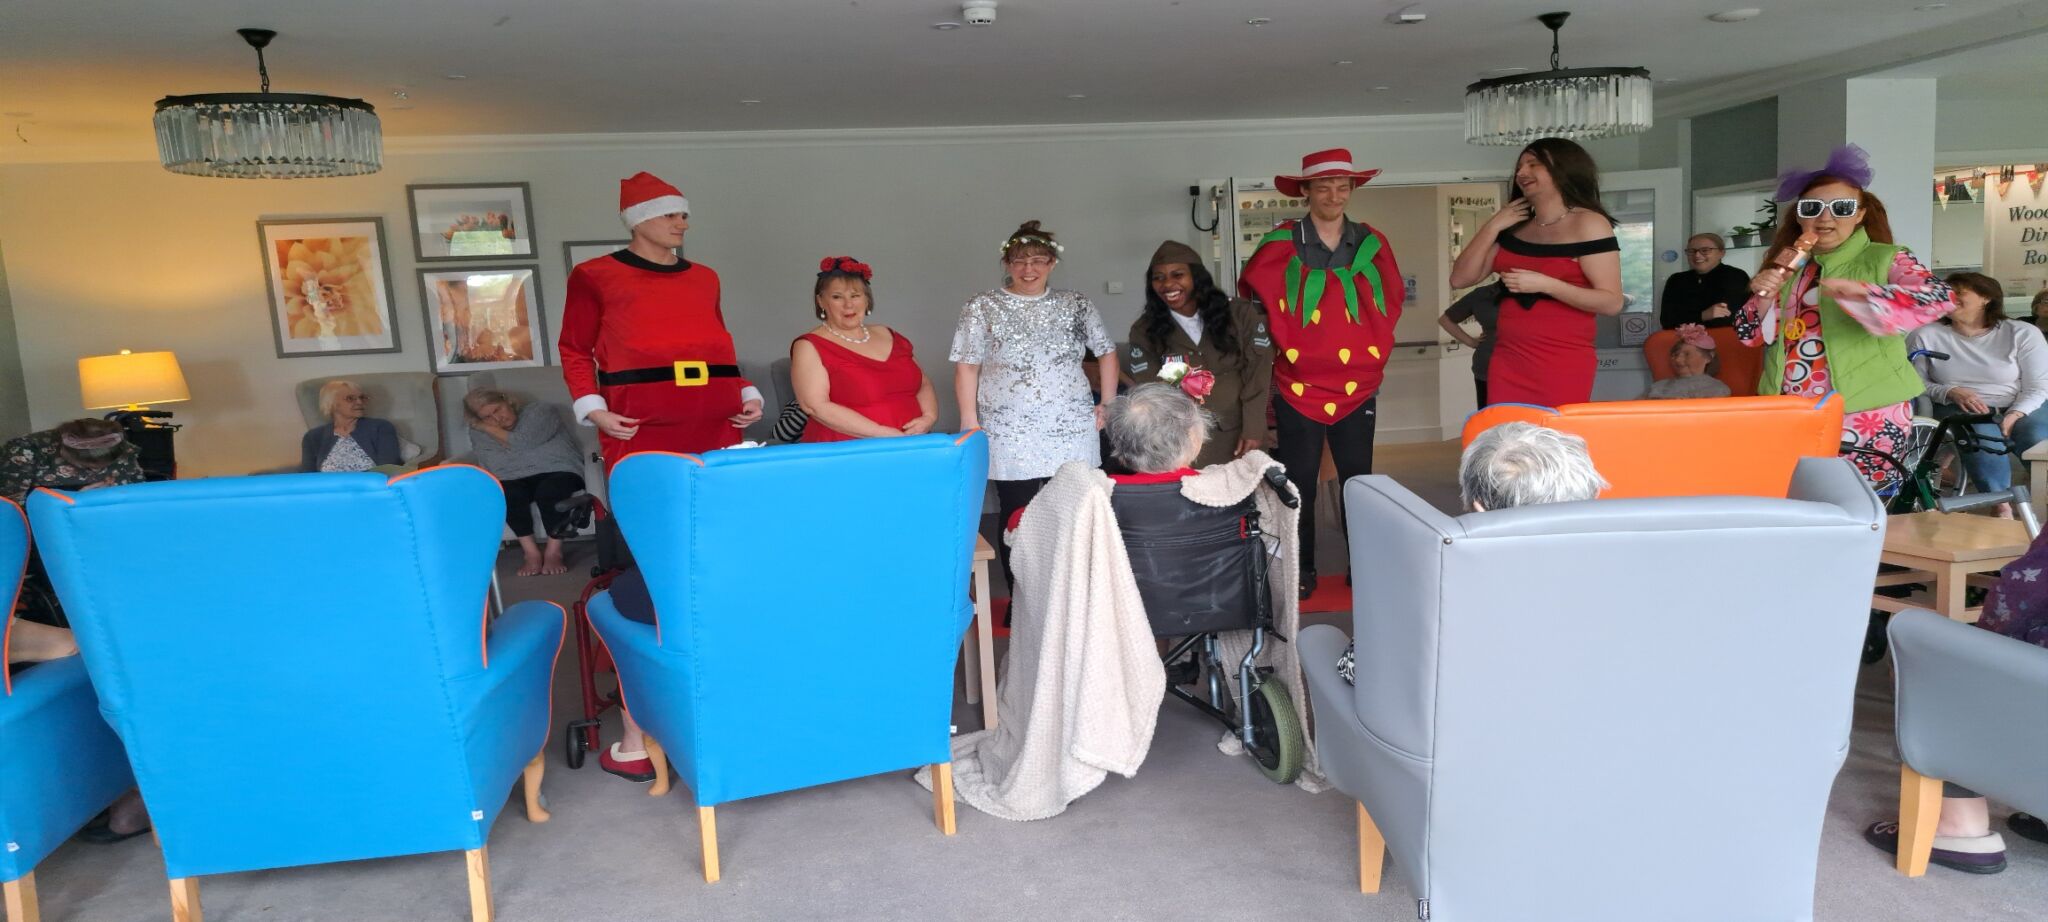 Explore how Hutton Manor Care Home in Pudsey celebrated National Gardening Week with a unique Fashion Parade in the Woodland Suite, designed to engage residents with dementia through meaningful activities and community connection